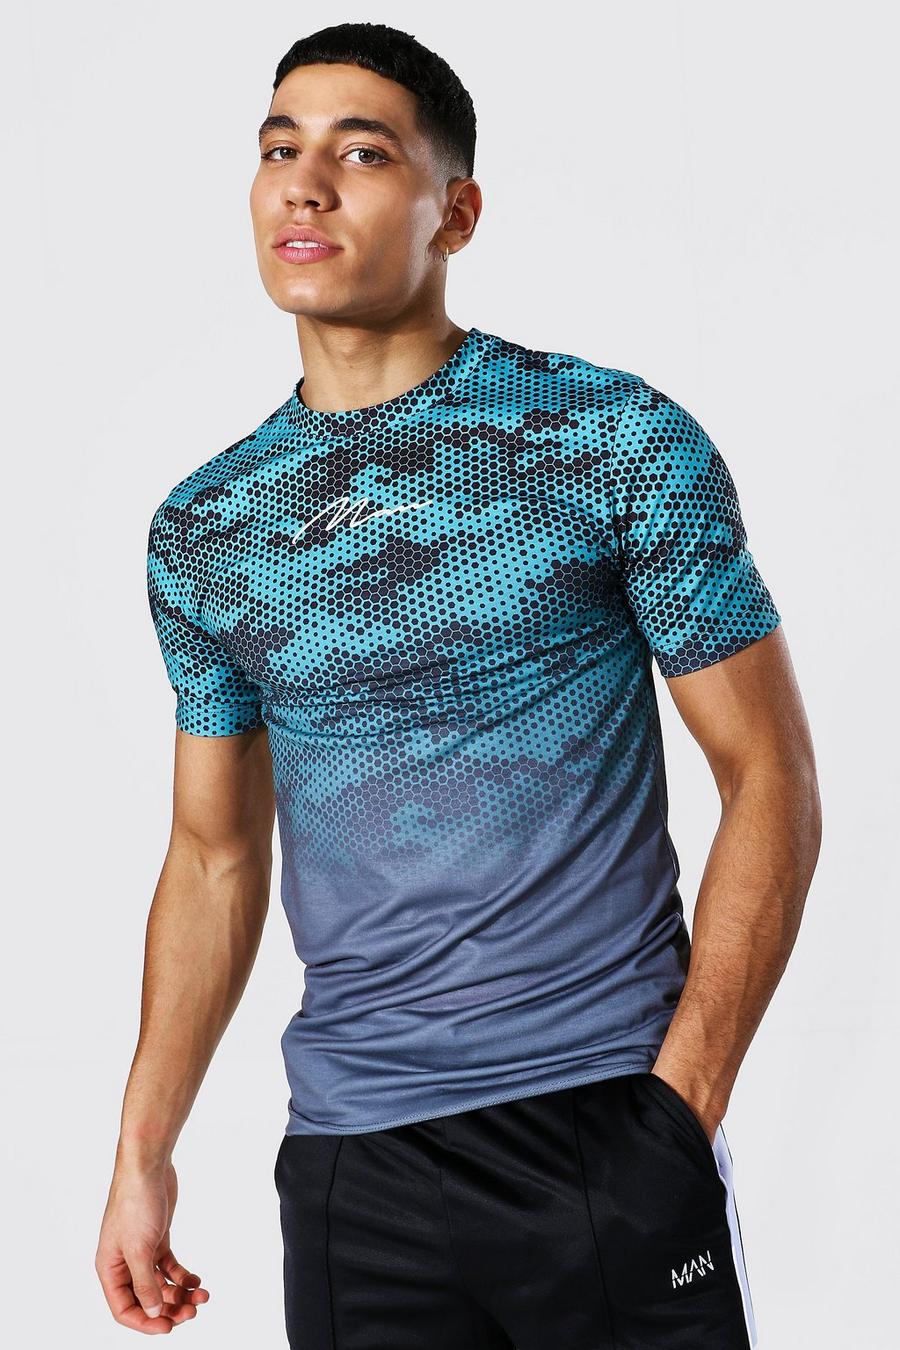 Teal Muscle Fit Man Ombre Camo Graphic T-Shirt image number 1